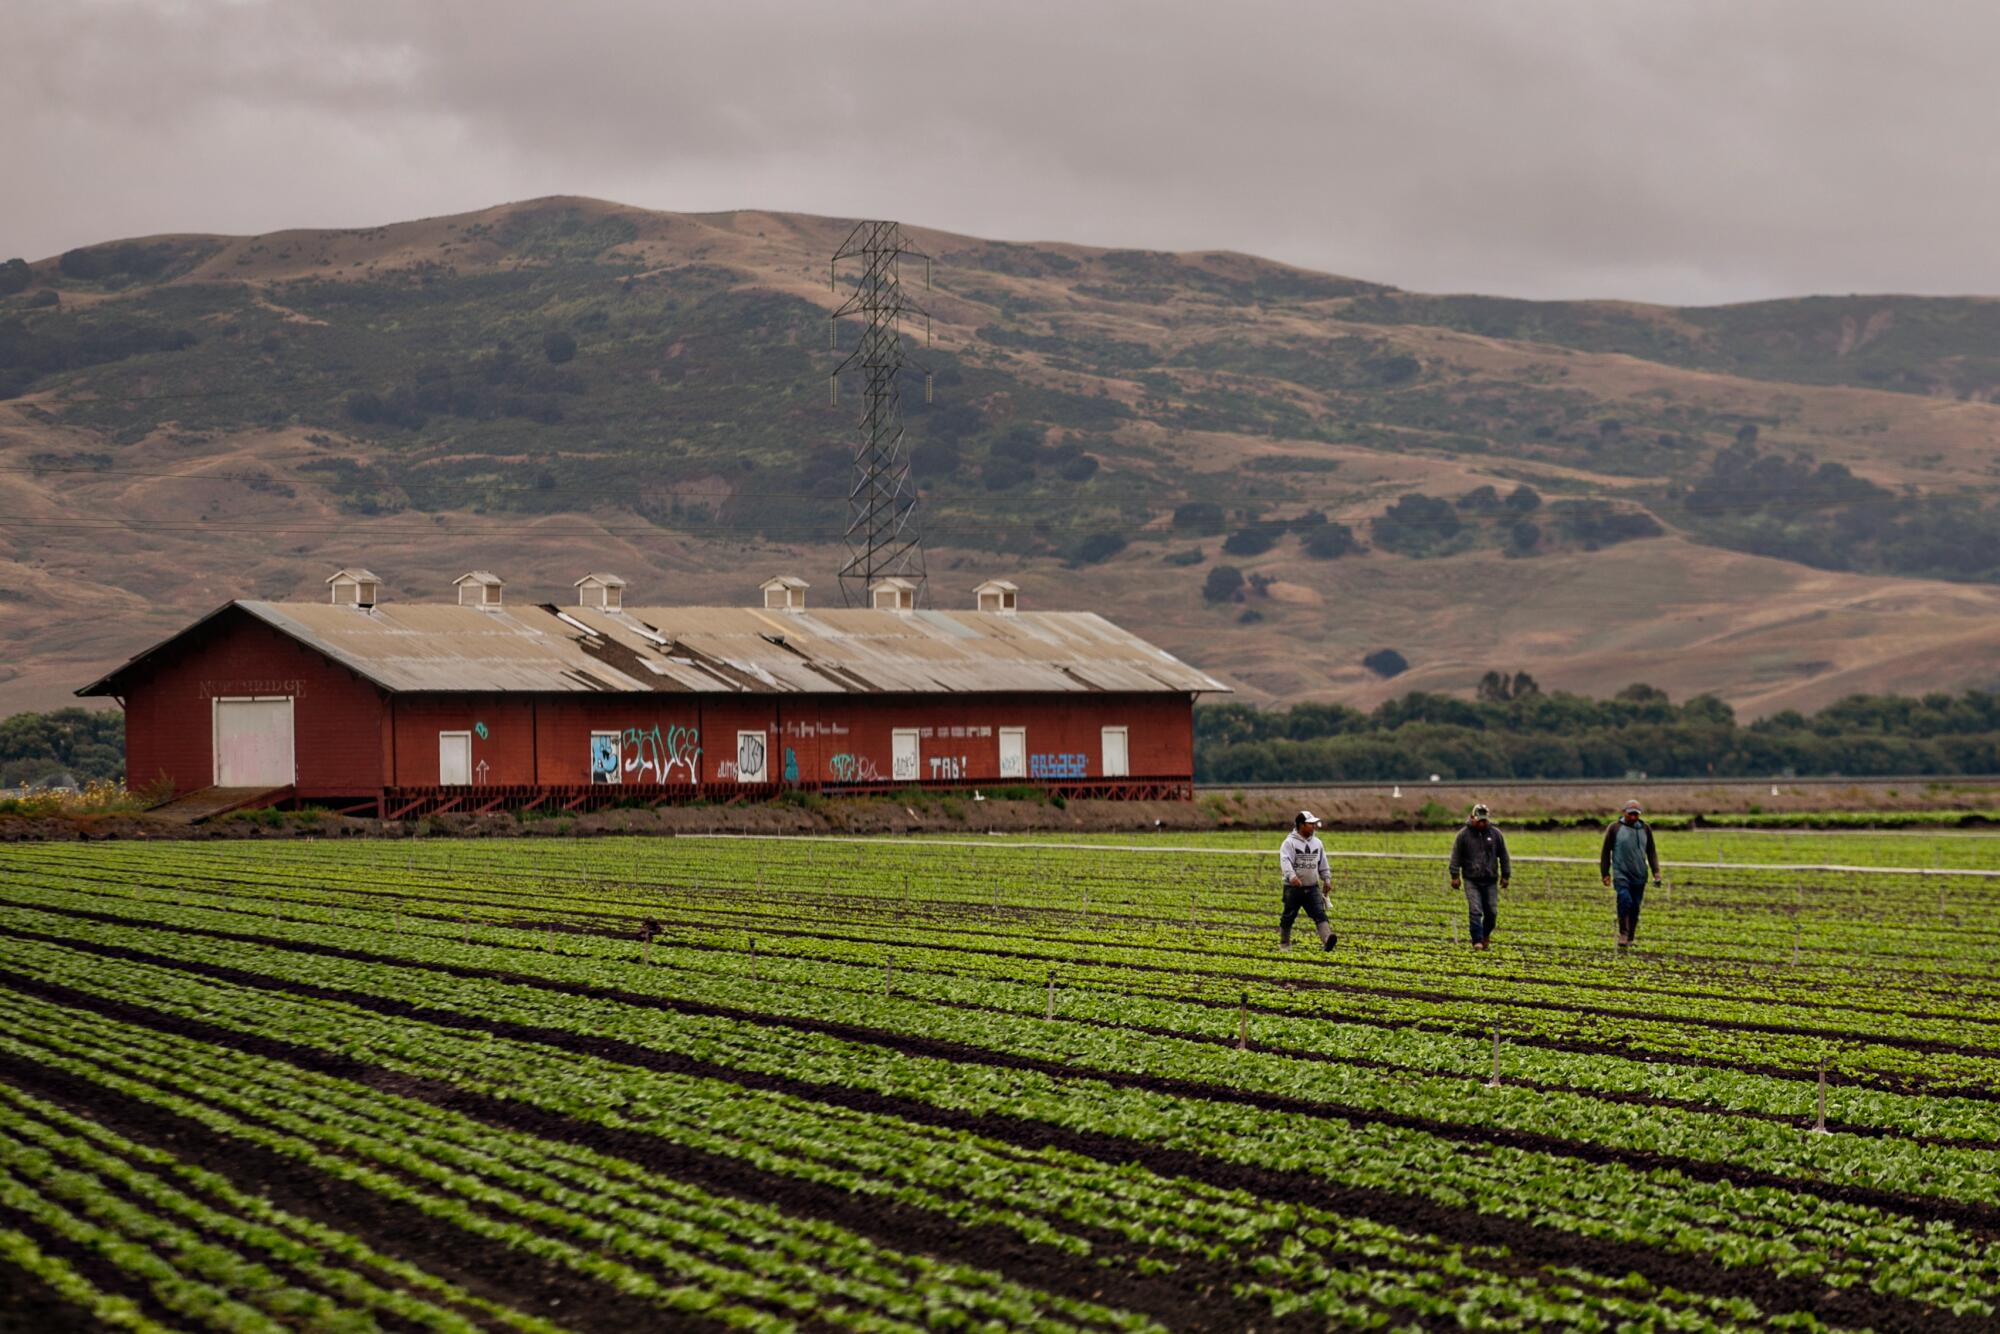 Farmworkers in the fields of rural San Benito County.